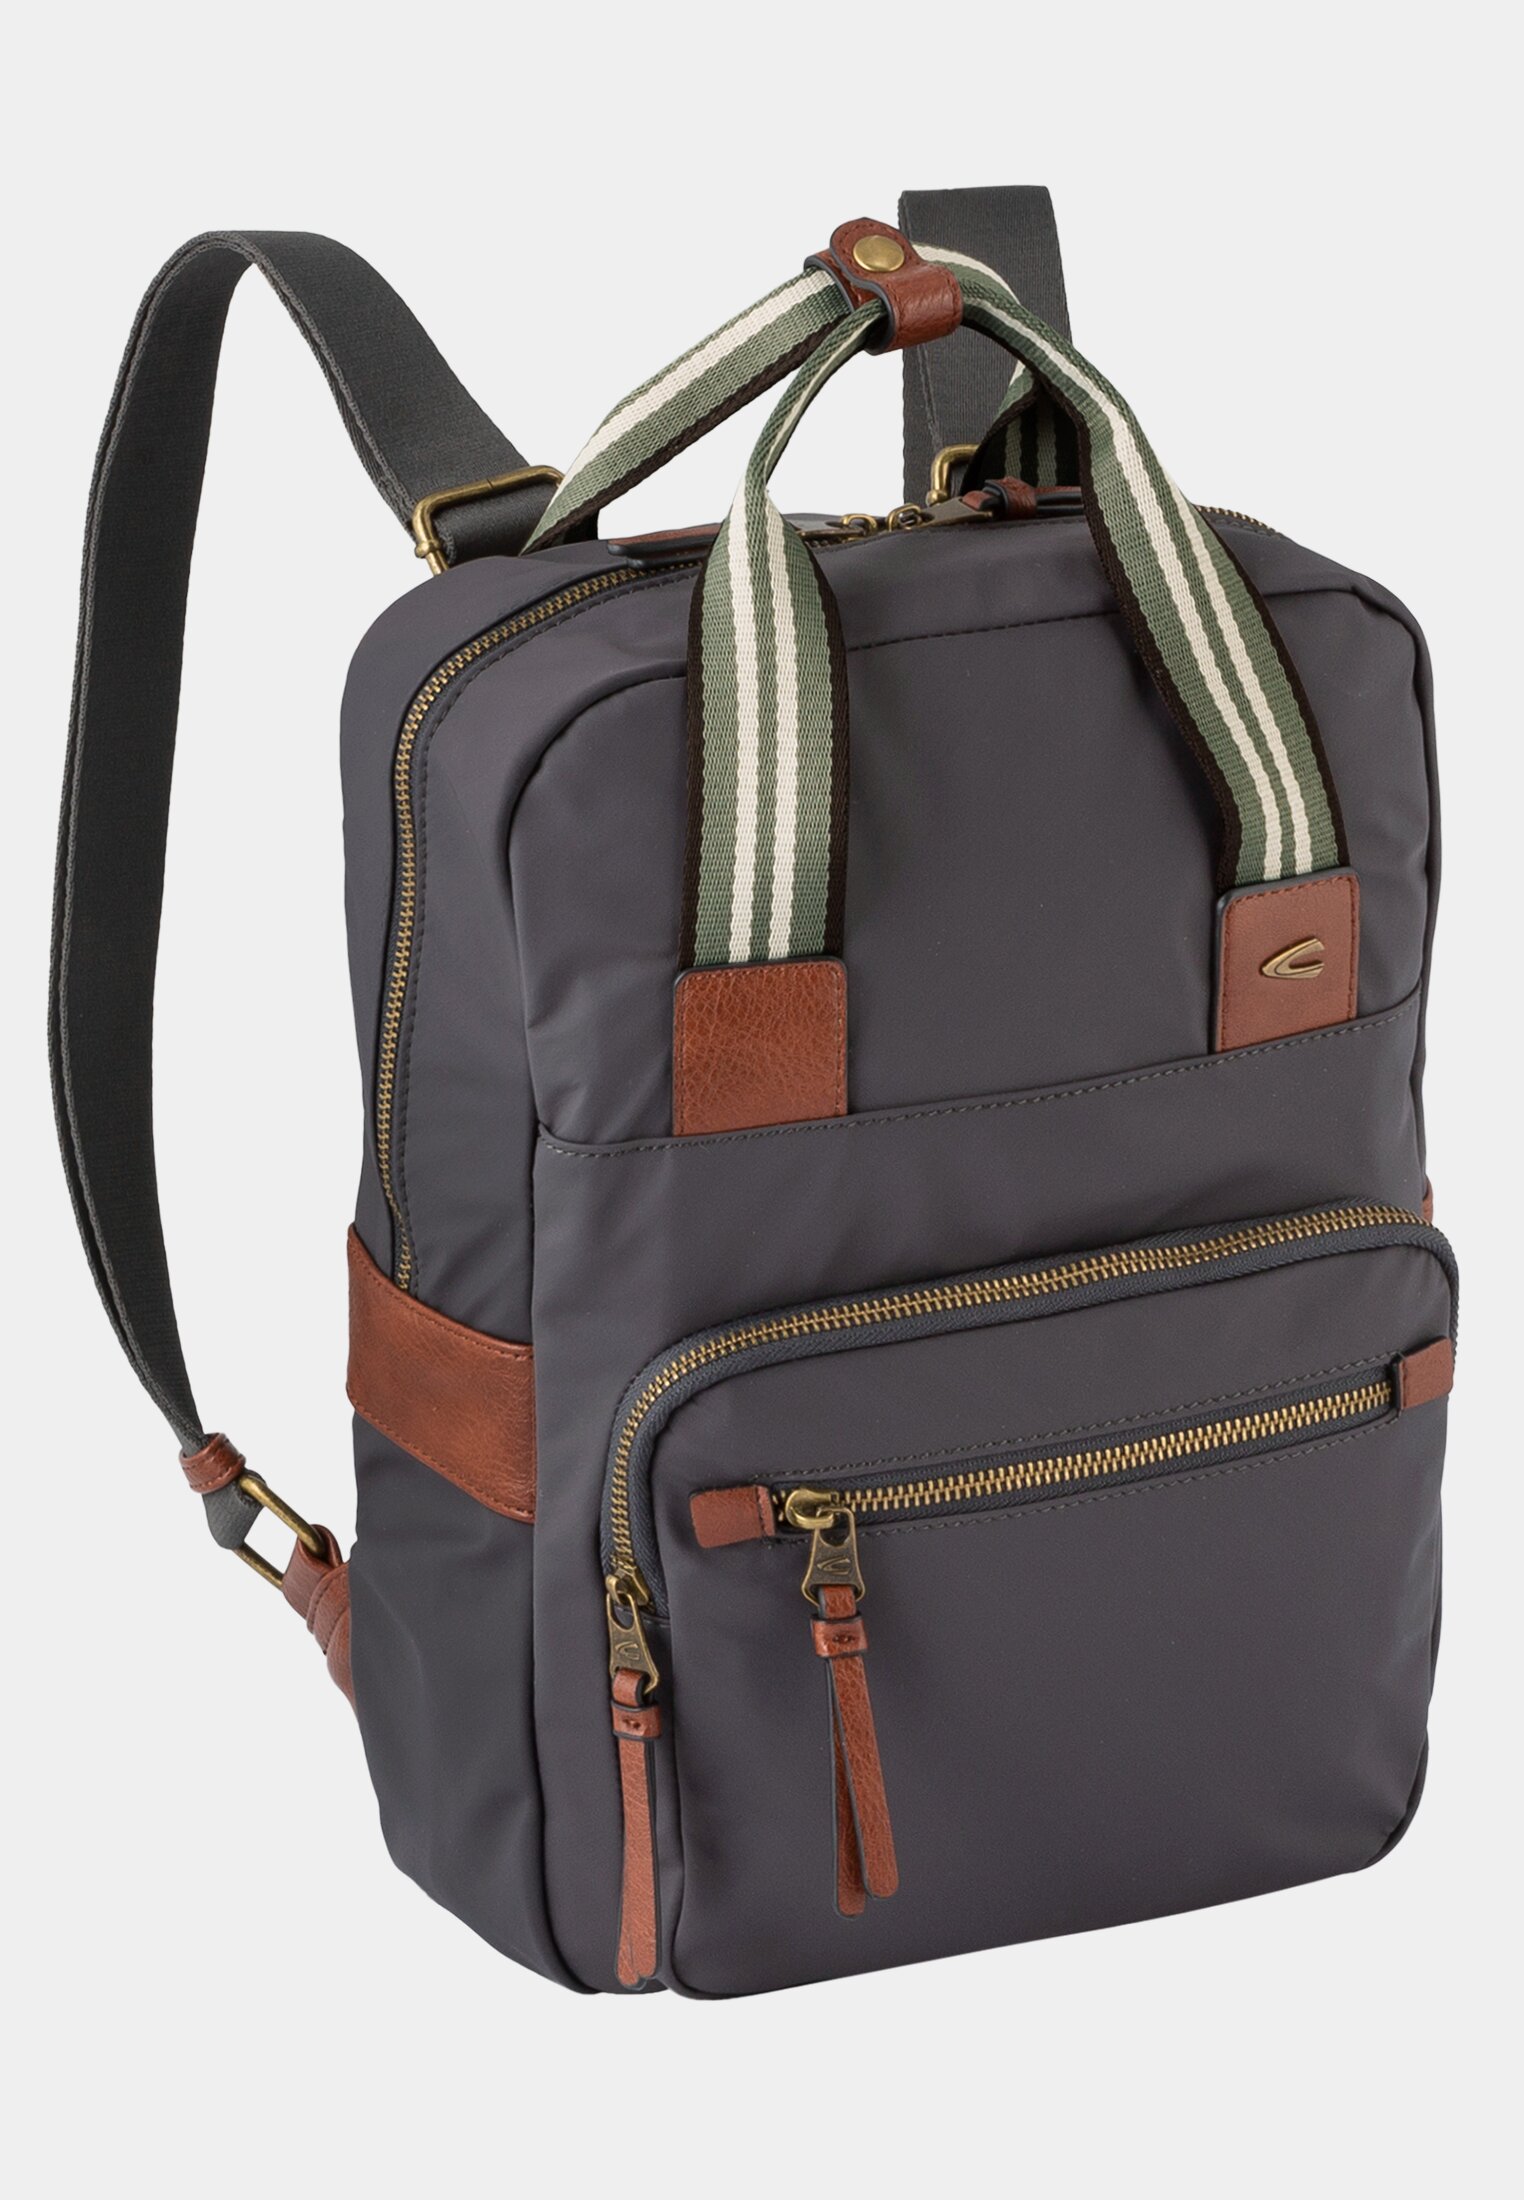 Camel Active Backpack with imitation leather trim